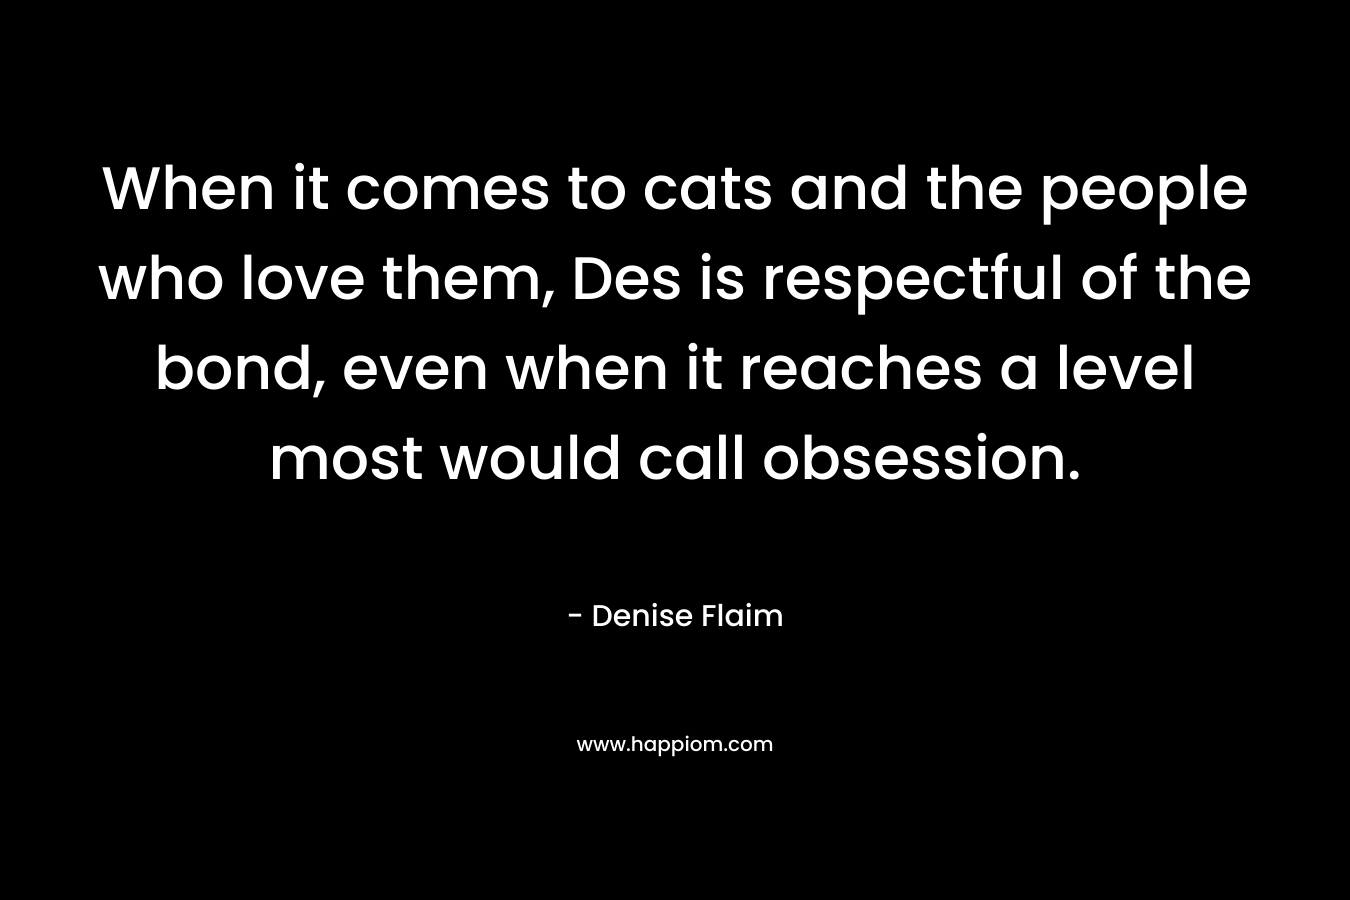 When it comes to cats and the people who love them, Des is respectful of the bond, even when it reaches a level most would call obsession.